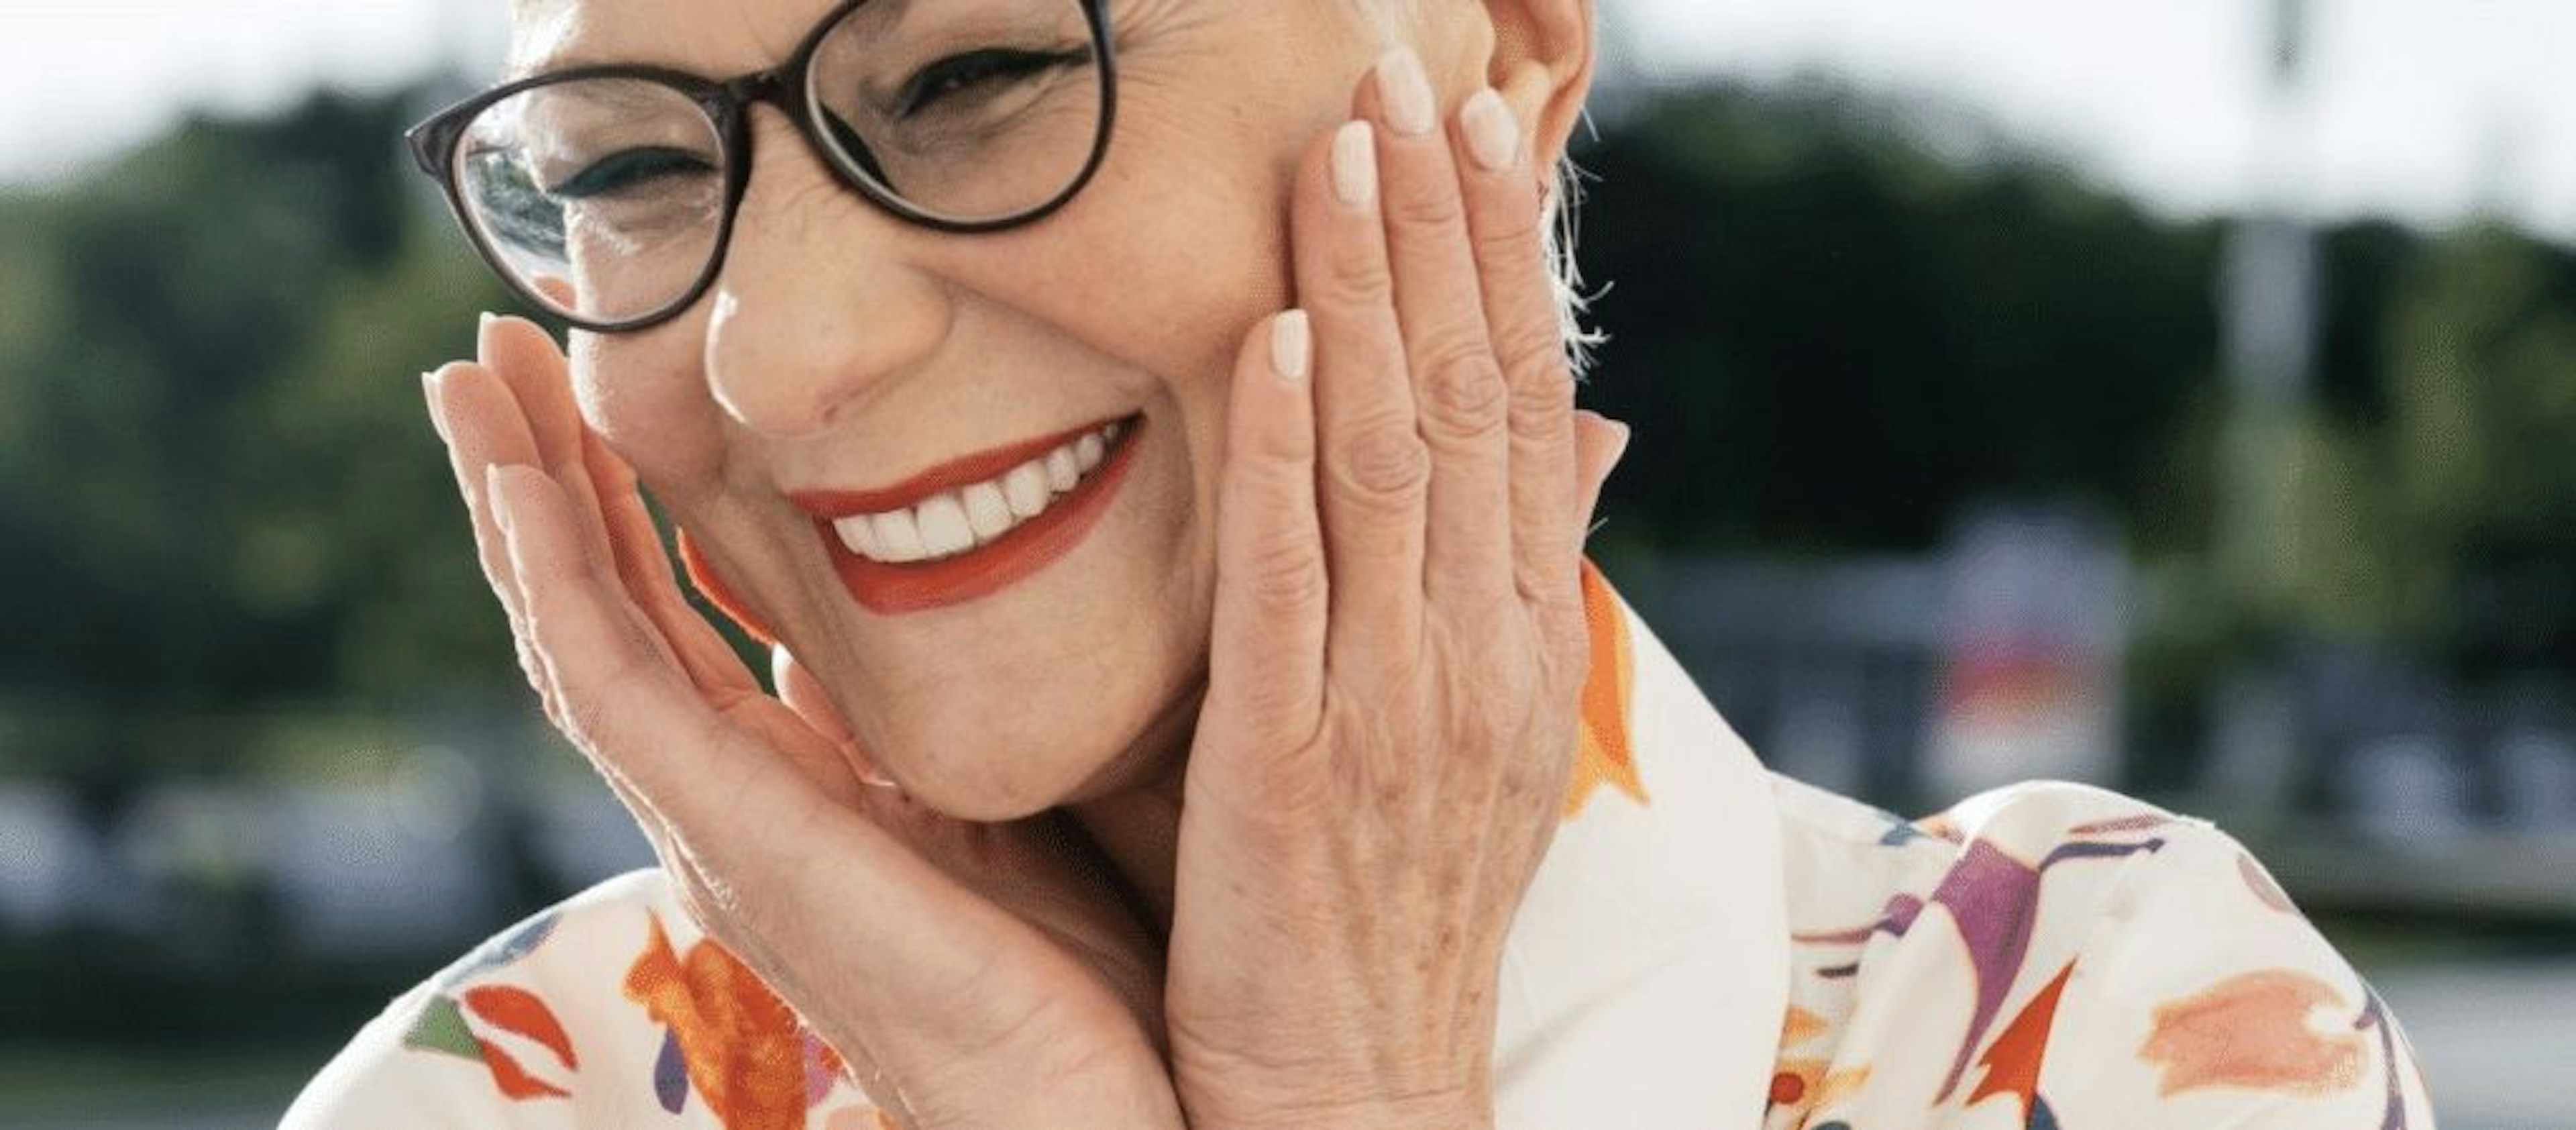 Tips For Treating Mature Filler Patients